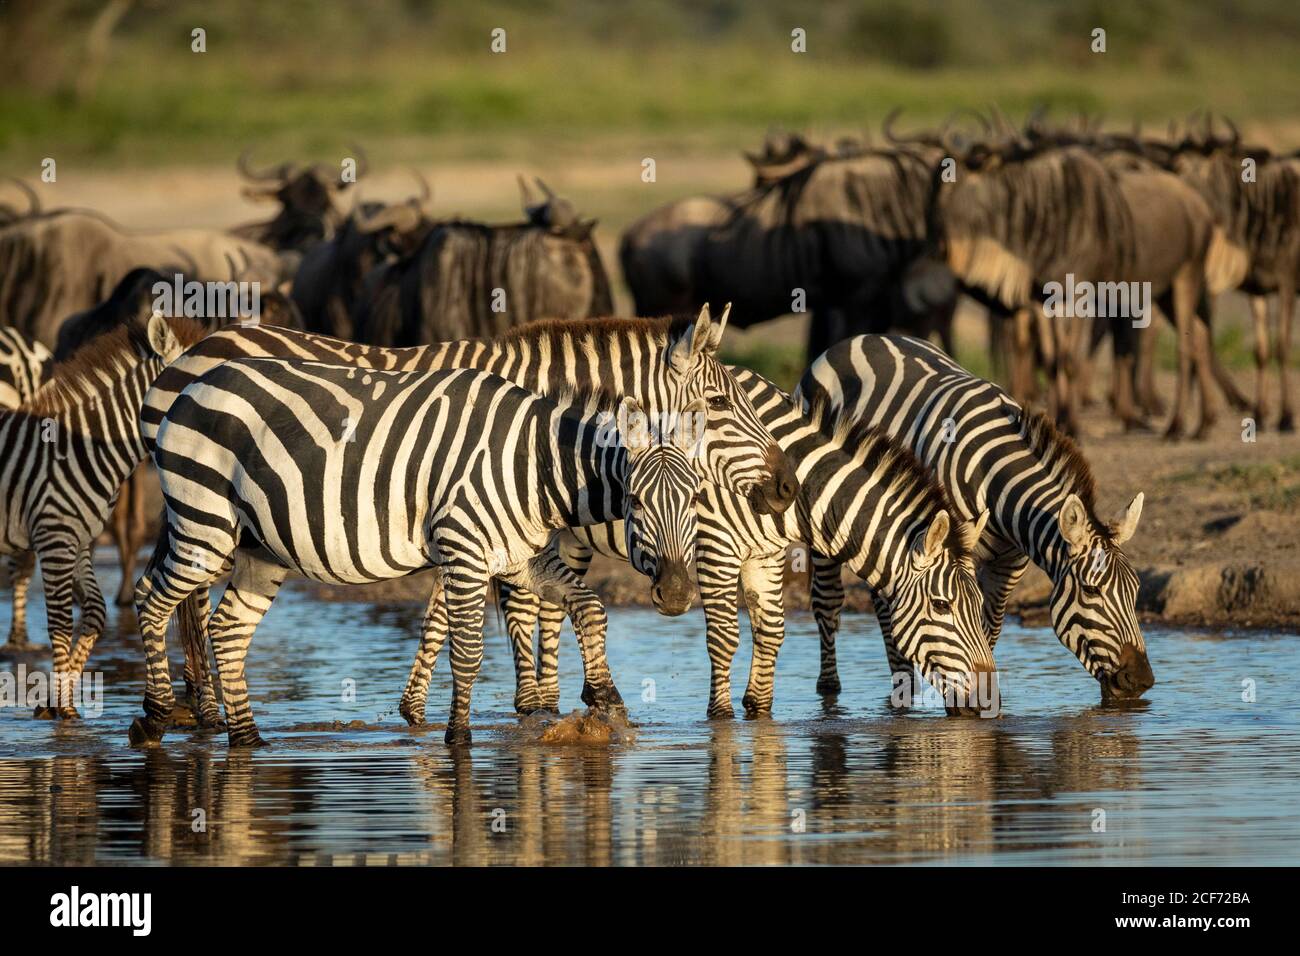 Herd of zebras standing in shallow river drinking water in golden afternoon sunlight in Ndutu Tanzania Stock Photo